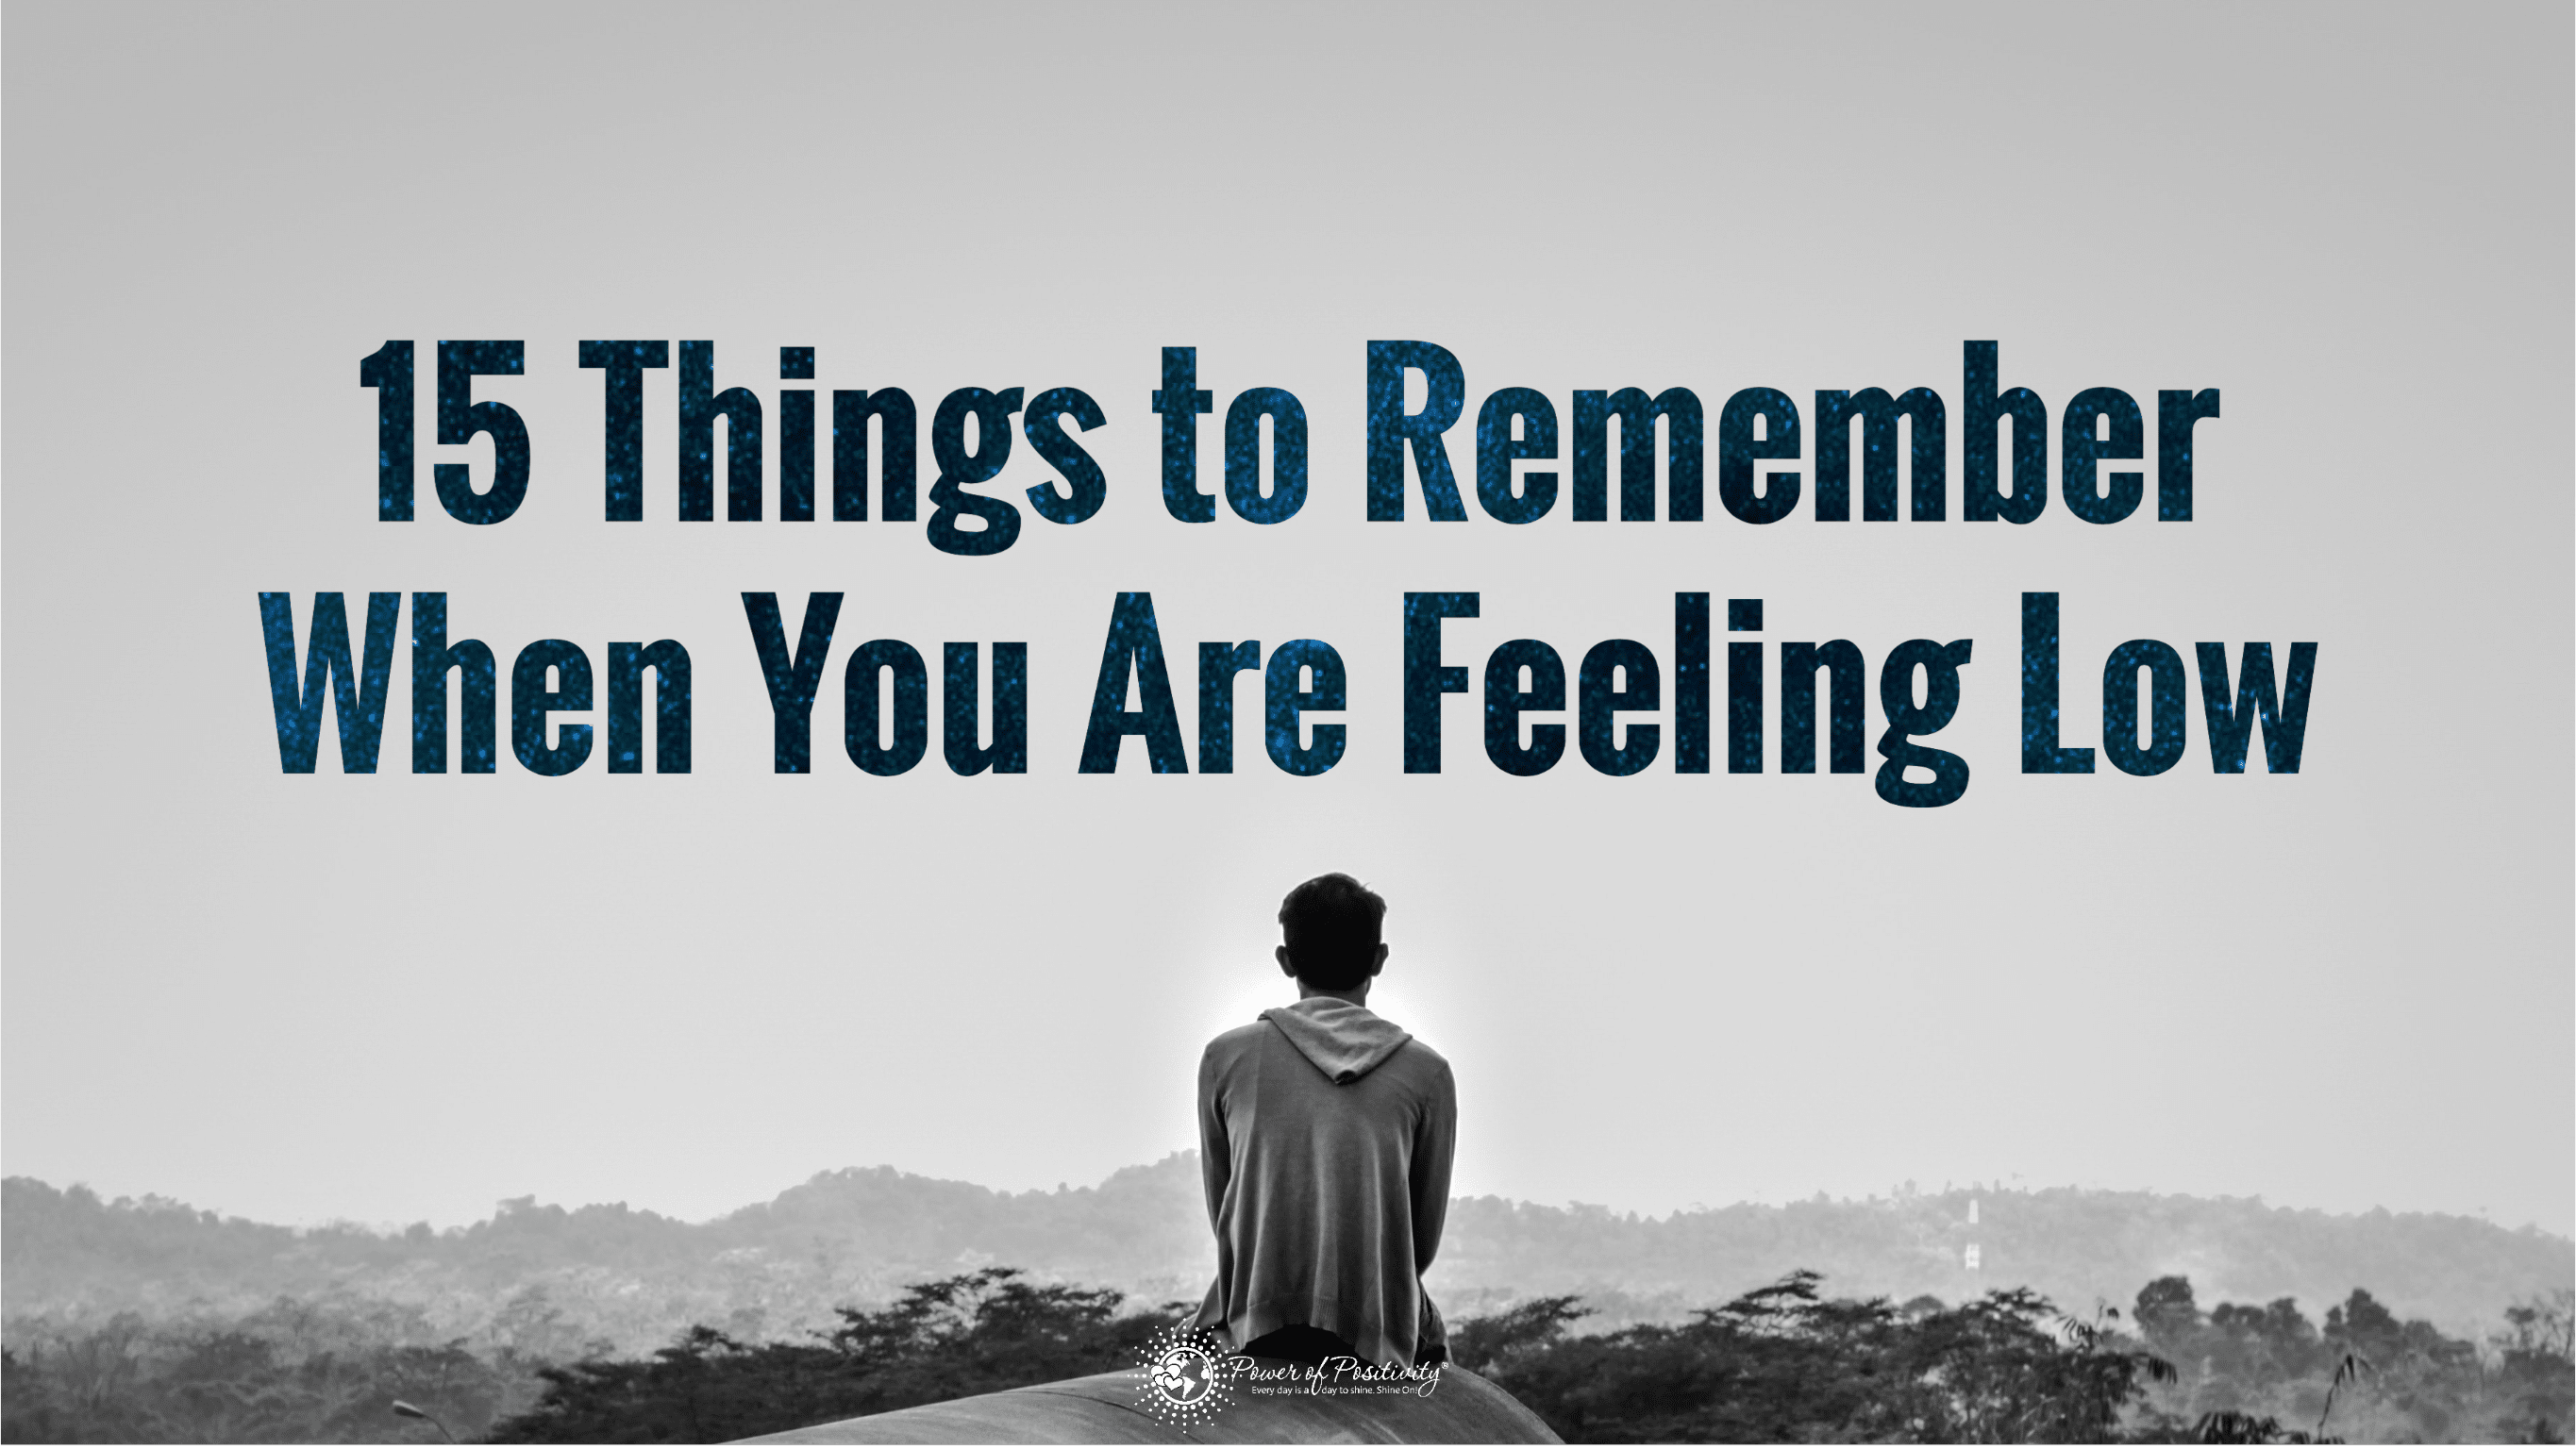 15 Things to Remember When You Are Feeling Low